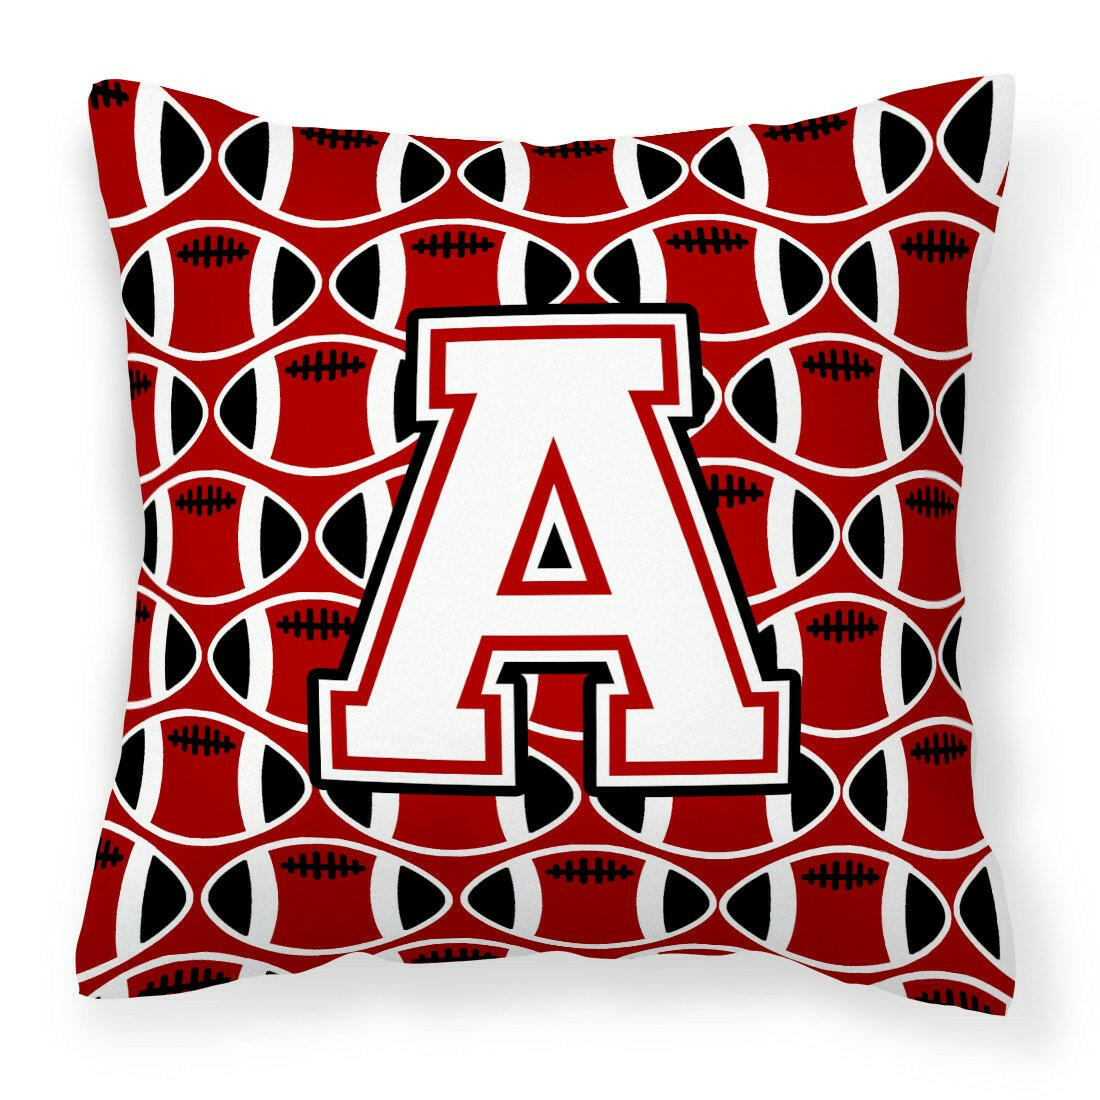 Letter A Football Cardinal and White Fabric Decorative Pillow CJ1082-APW1414 by Caroline's Treasures